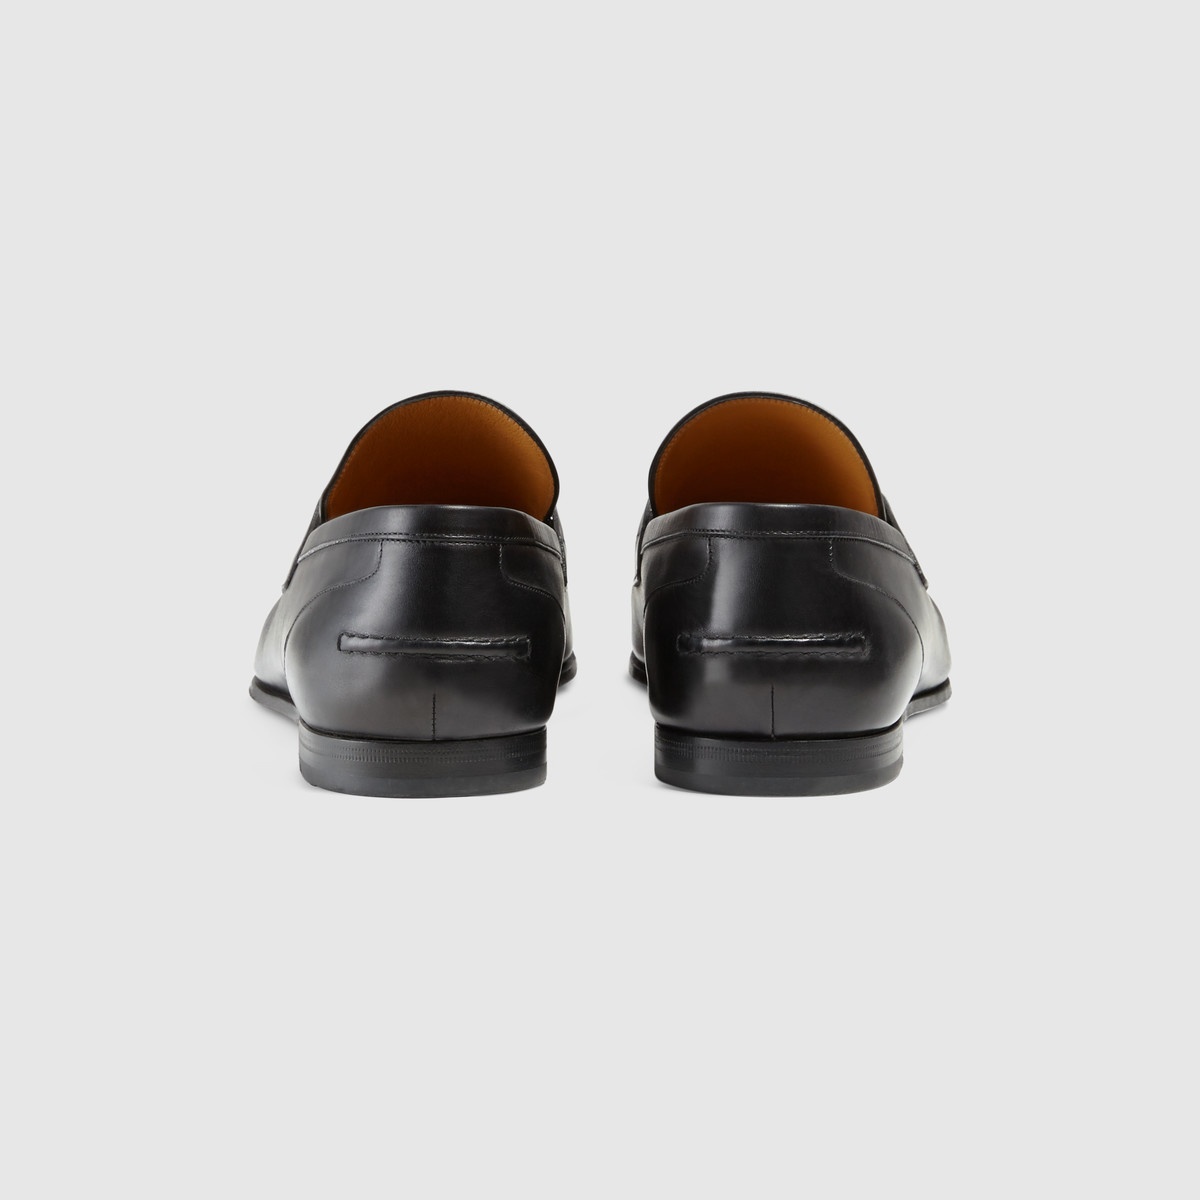 Gucci Jordaan leather loafer - 4